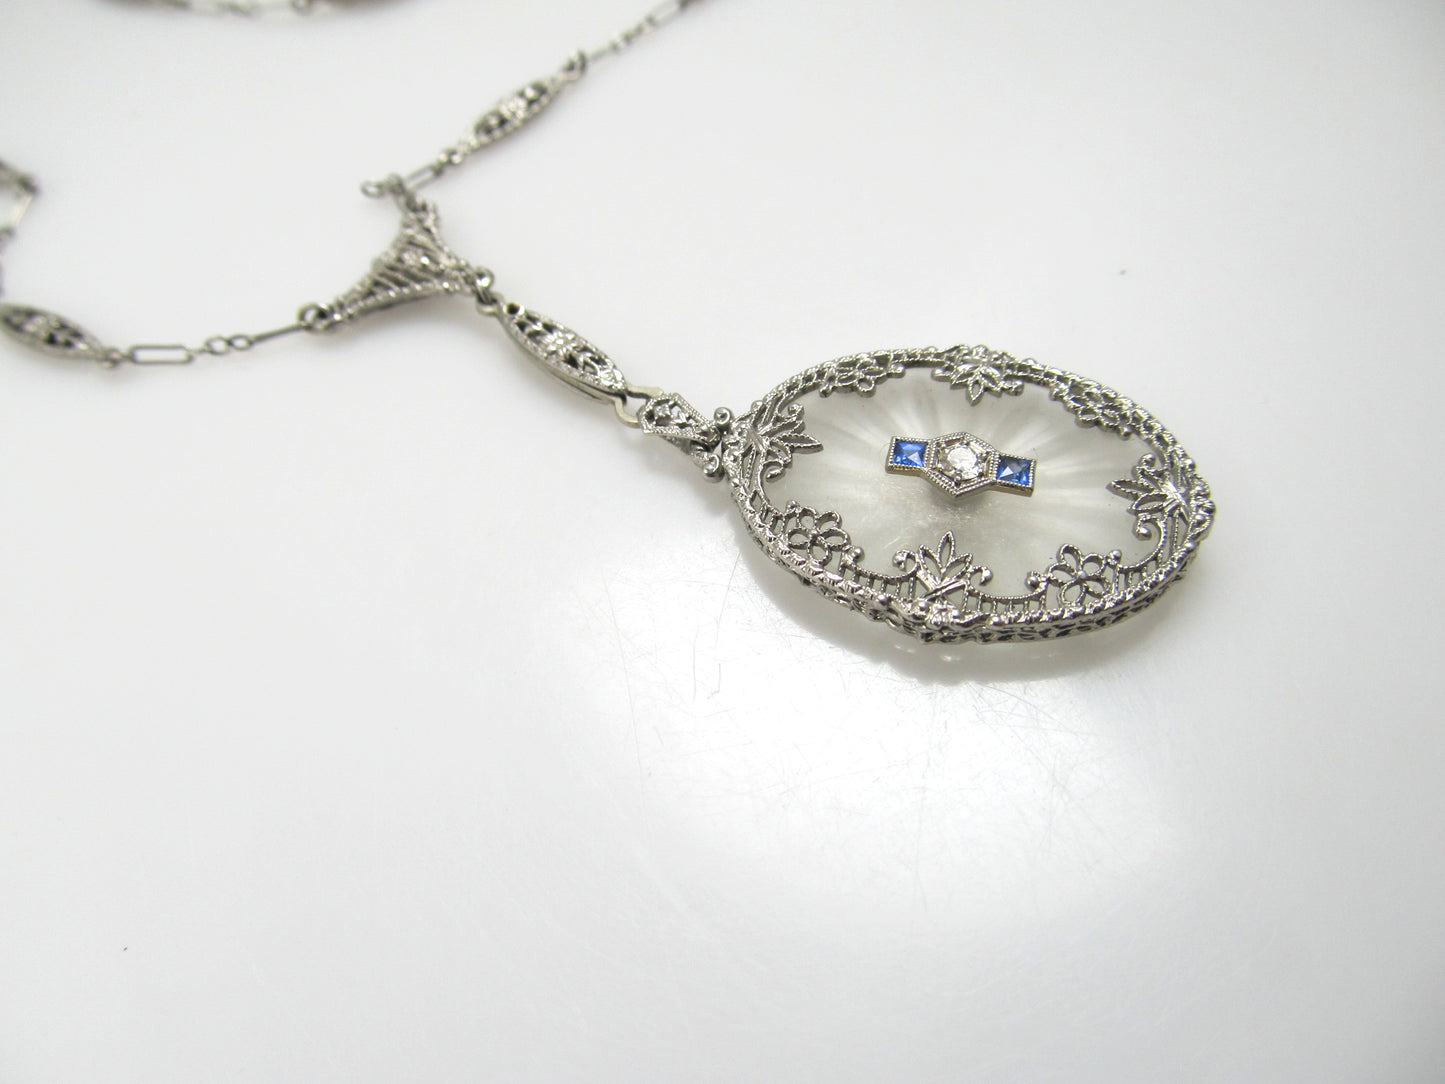 14k White Gold Filigree Necklace With A Diamond, Sapphires And Camphor Glass, Circa 1920